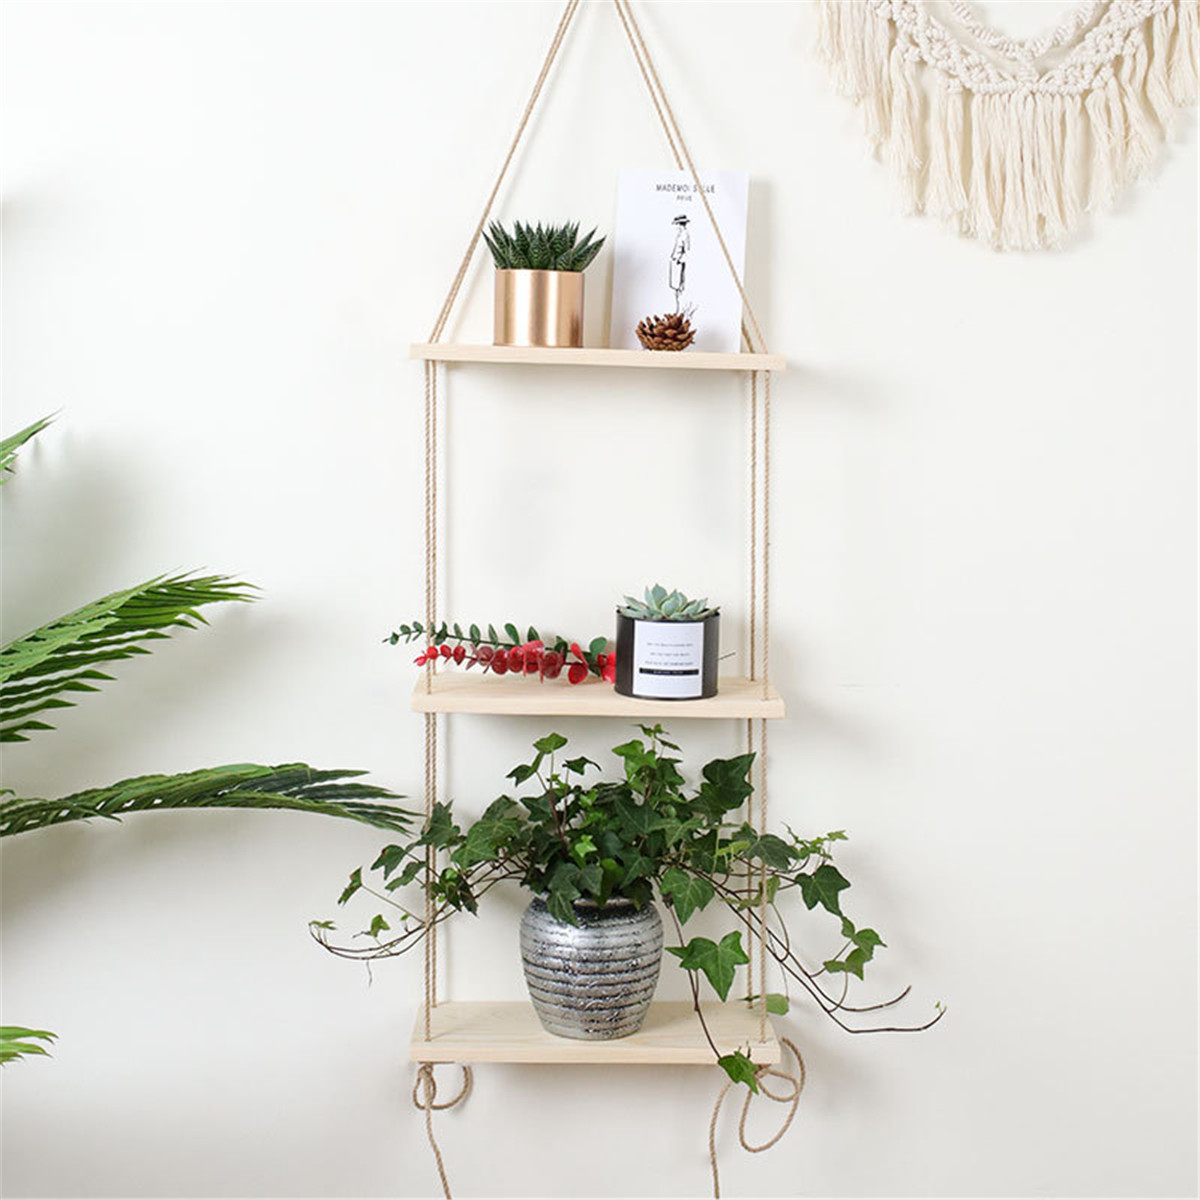 2/3 Tiers Rope Wall Hanging Shelf Vintage Solid Wood Floating Wall Mounting Storage Rack Home Office Decoration